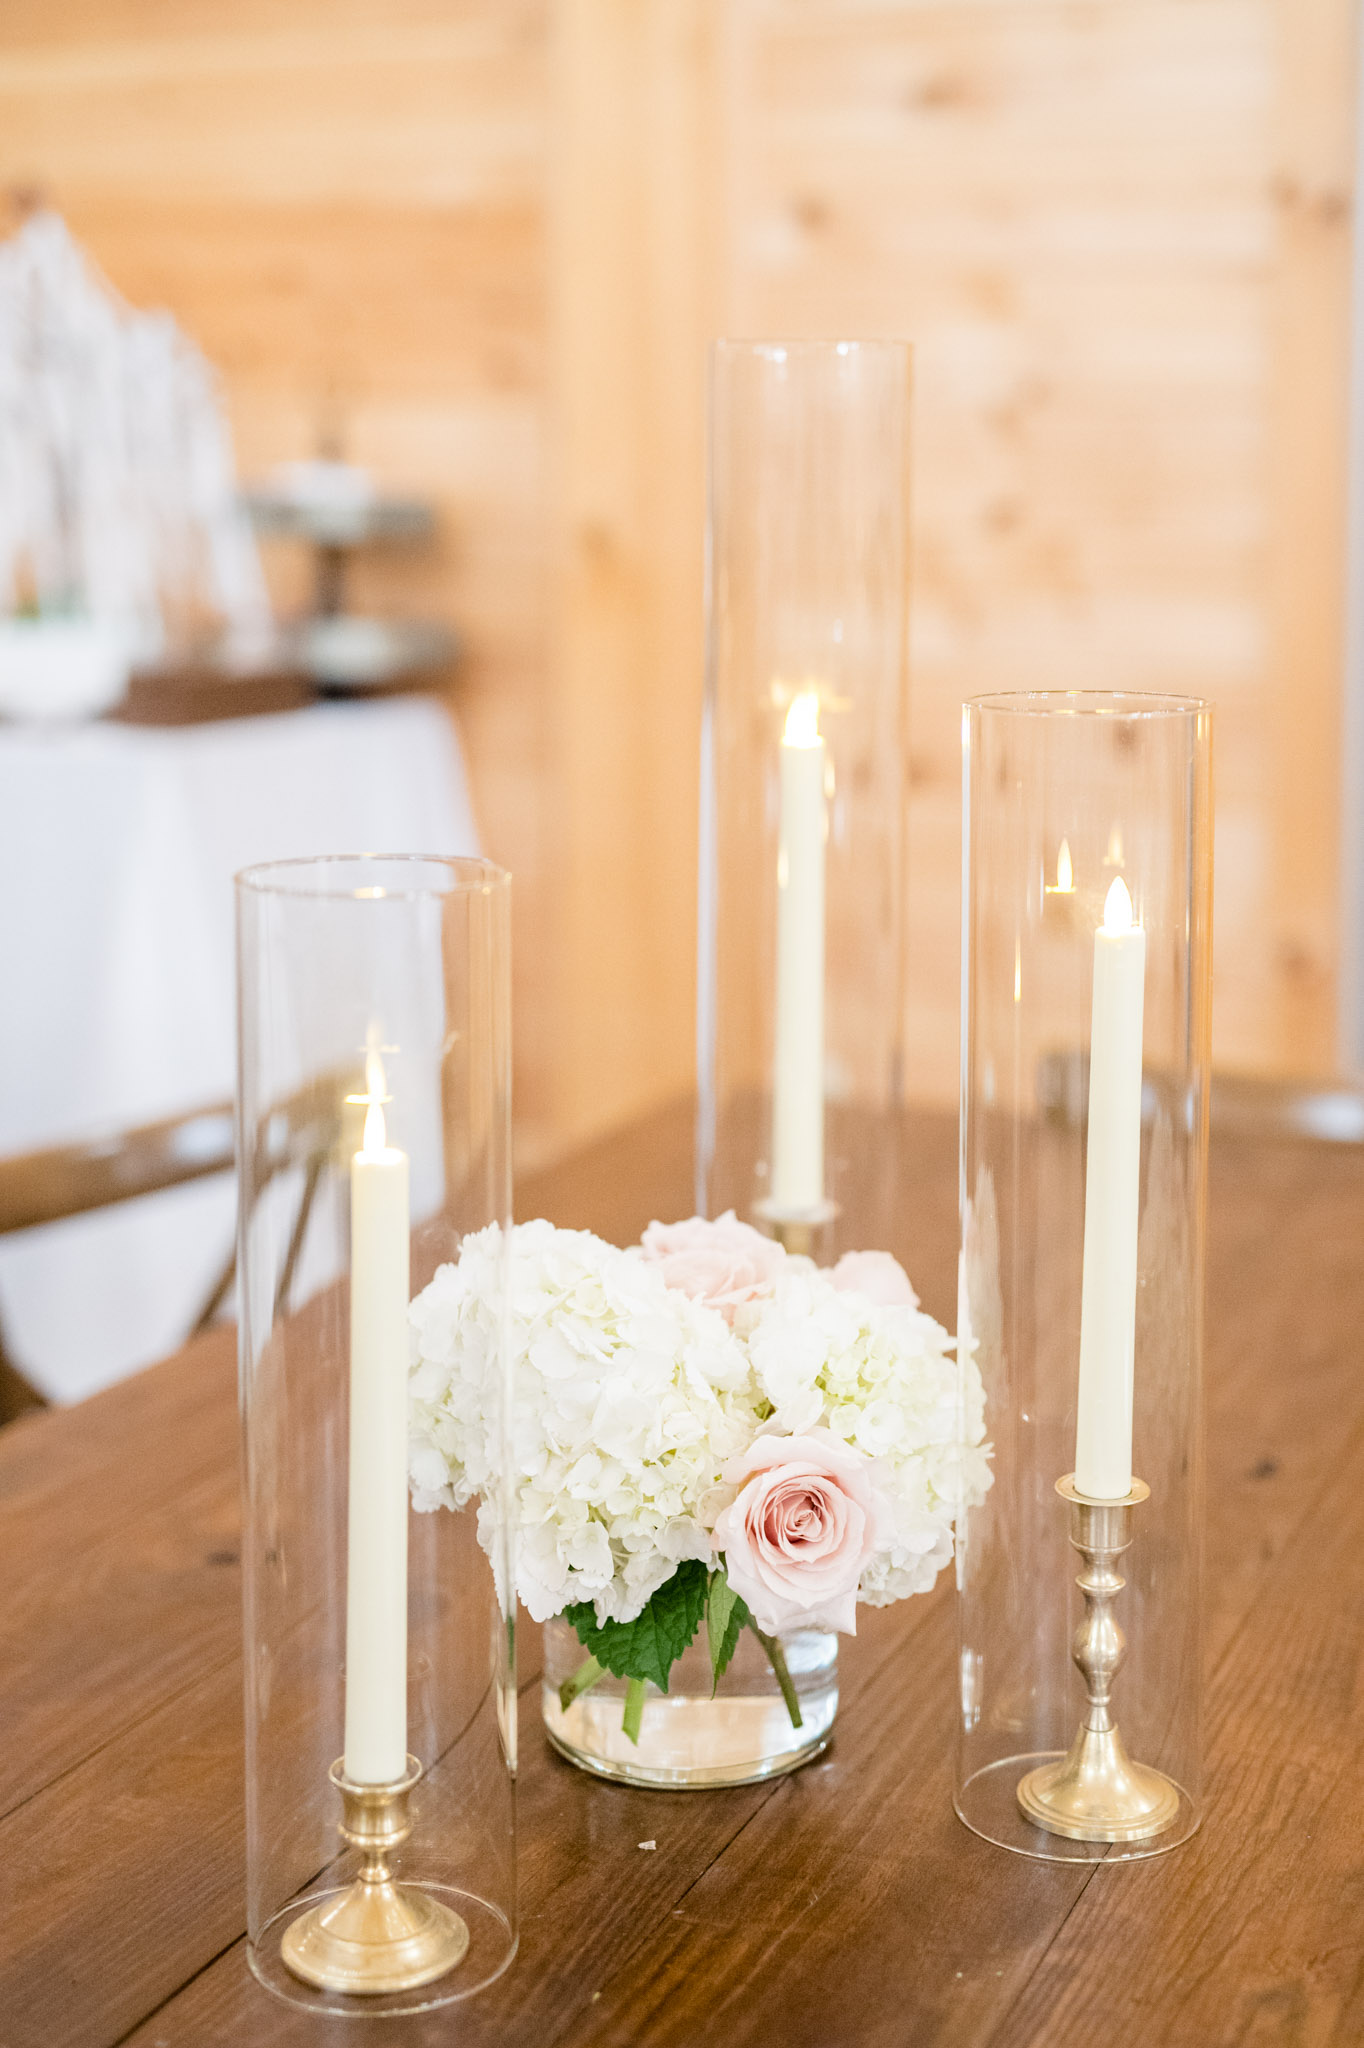 Flowers and candles on reception table.